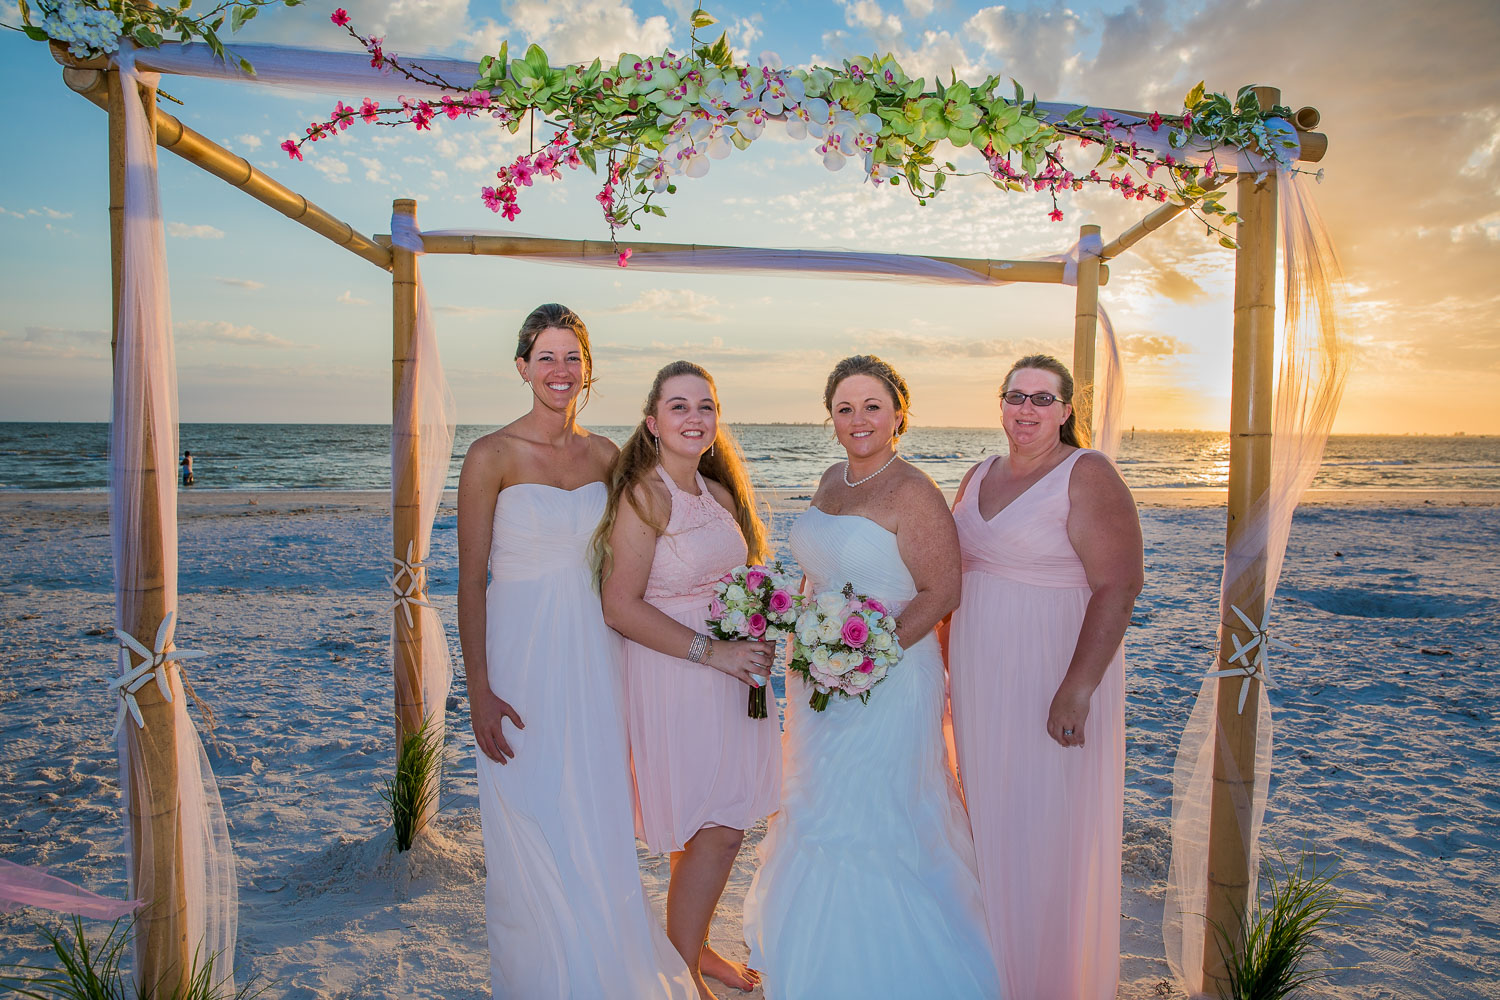   Steve McCarthy Photography: Premier SWFL Wedding Photographer serving all of SWFL , from Tampa to Naples, Fort Myers Beach, Pine Island, Sanibel, Captiva and Marco Island and over to Miami and up to Delray Beach, including: Tampa, Sarasota, Venice,